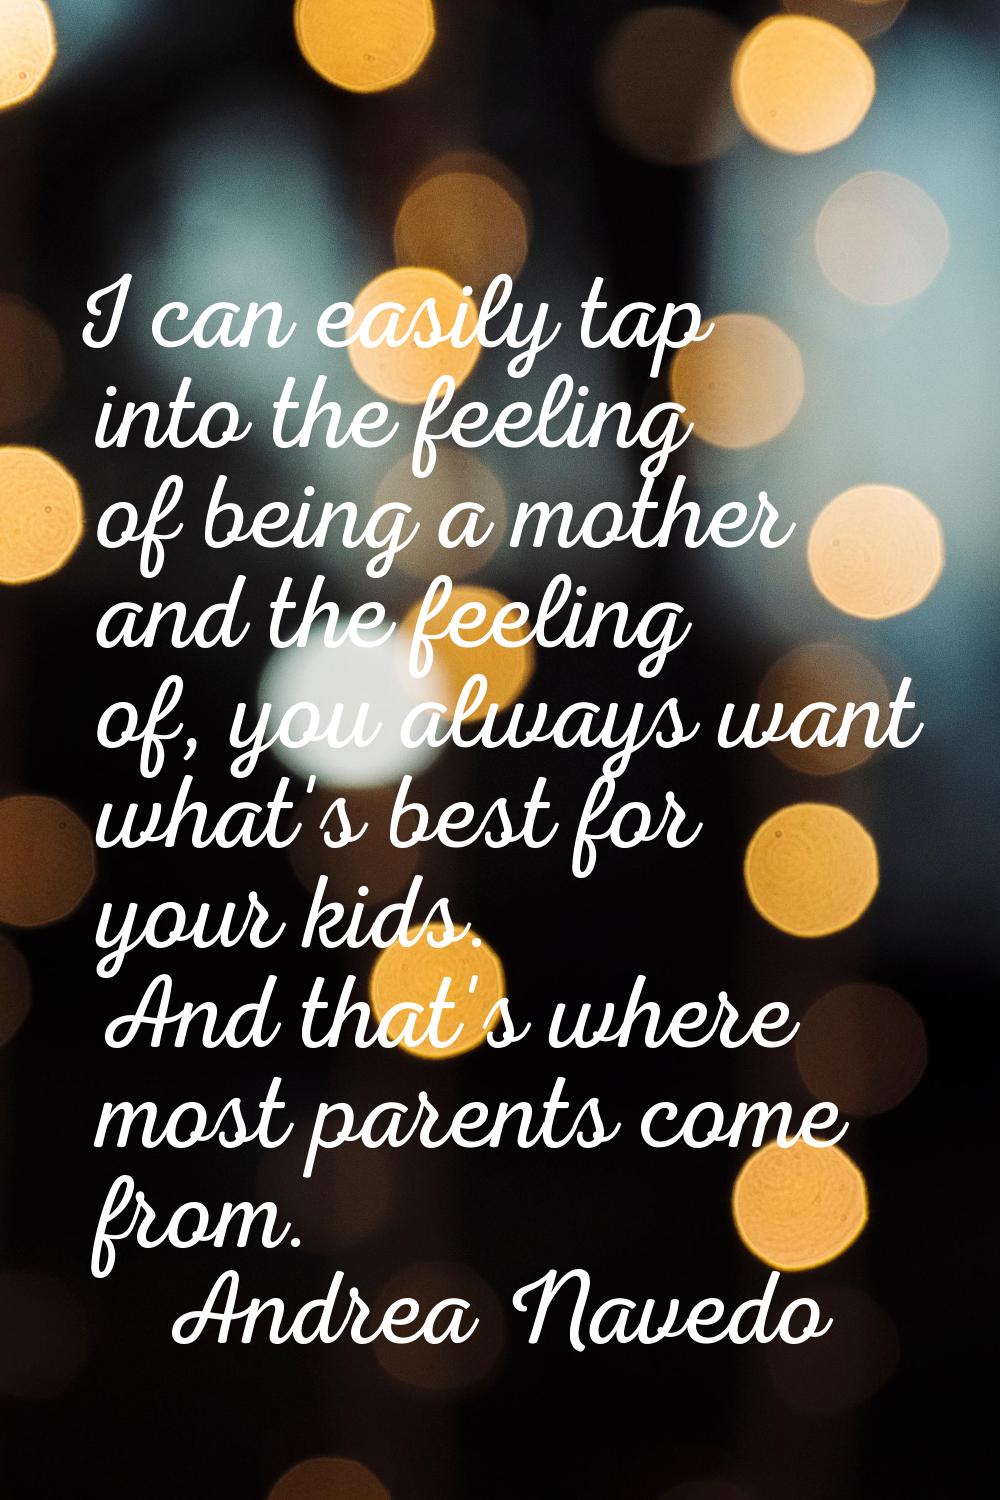 I can easily tap into the feeling of being a mother and the feeling of, you always want what's best